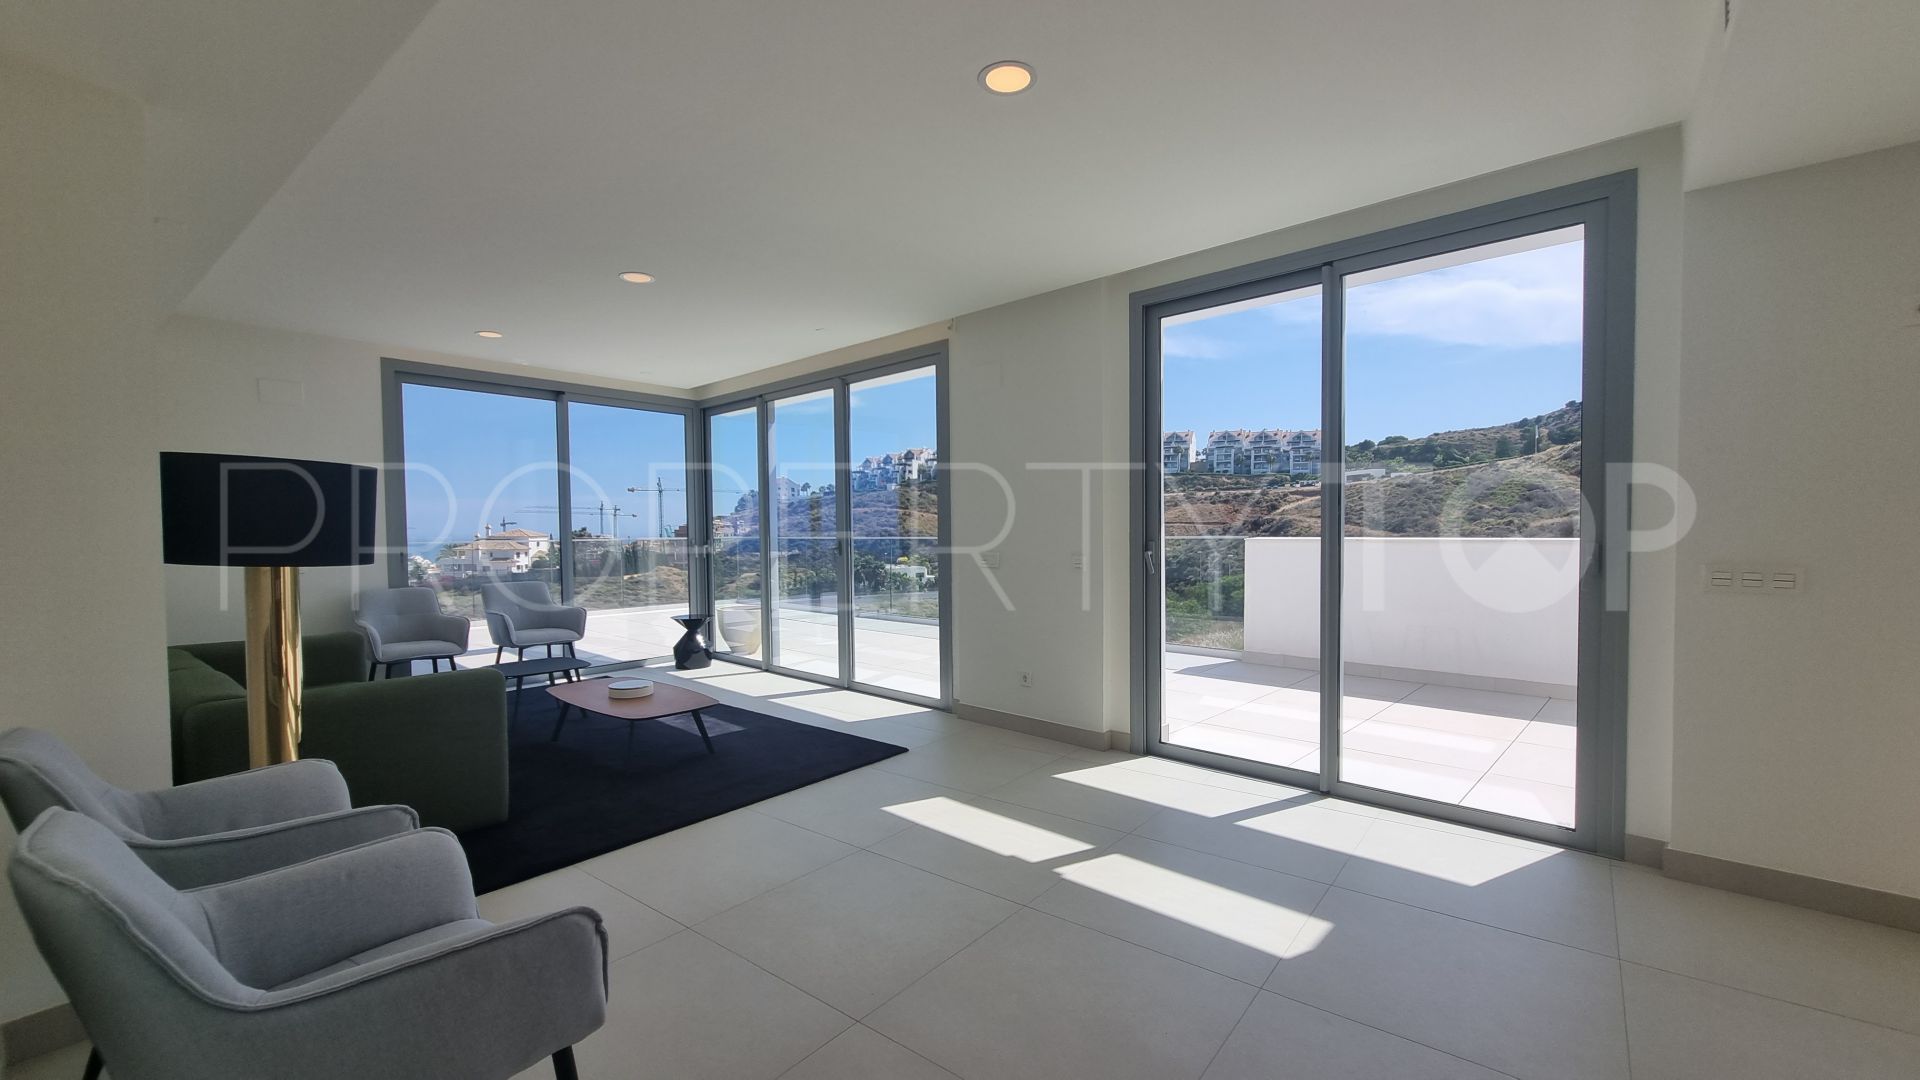 Penthouse for sale in Calanova Golf with 2 bedrooms